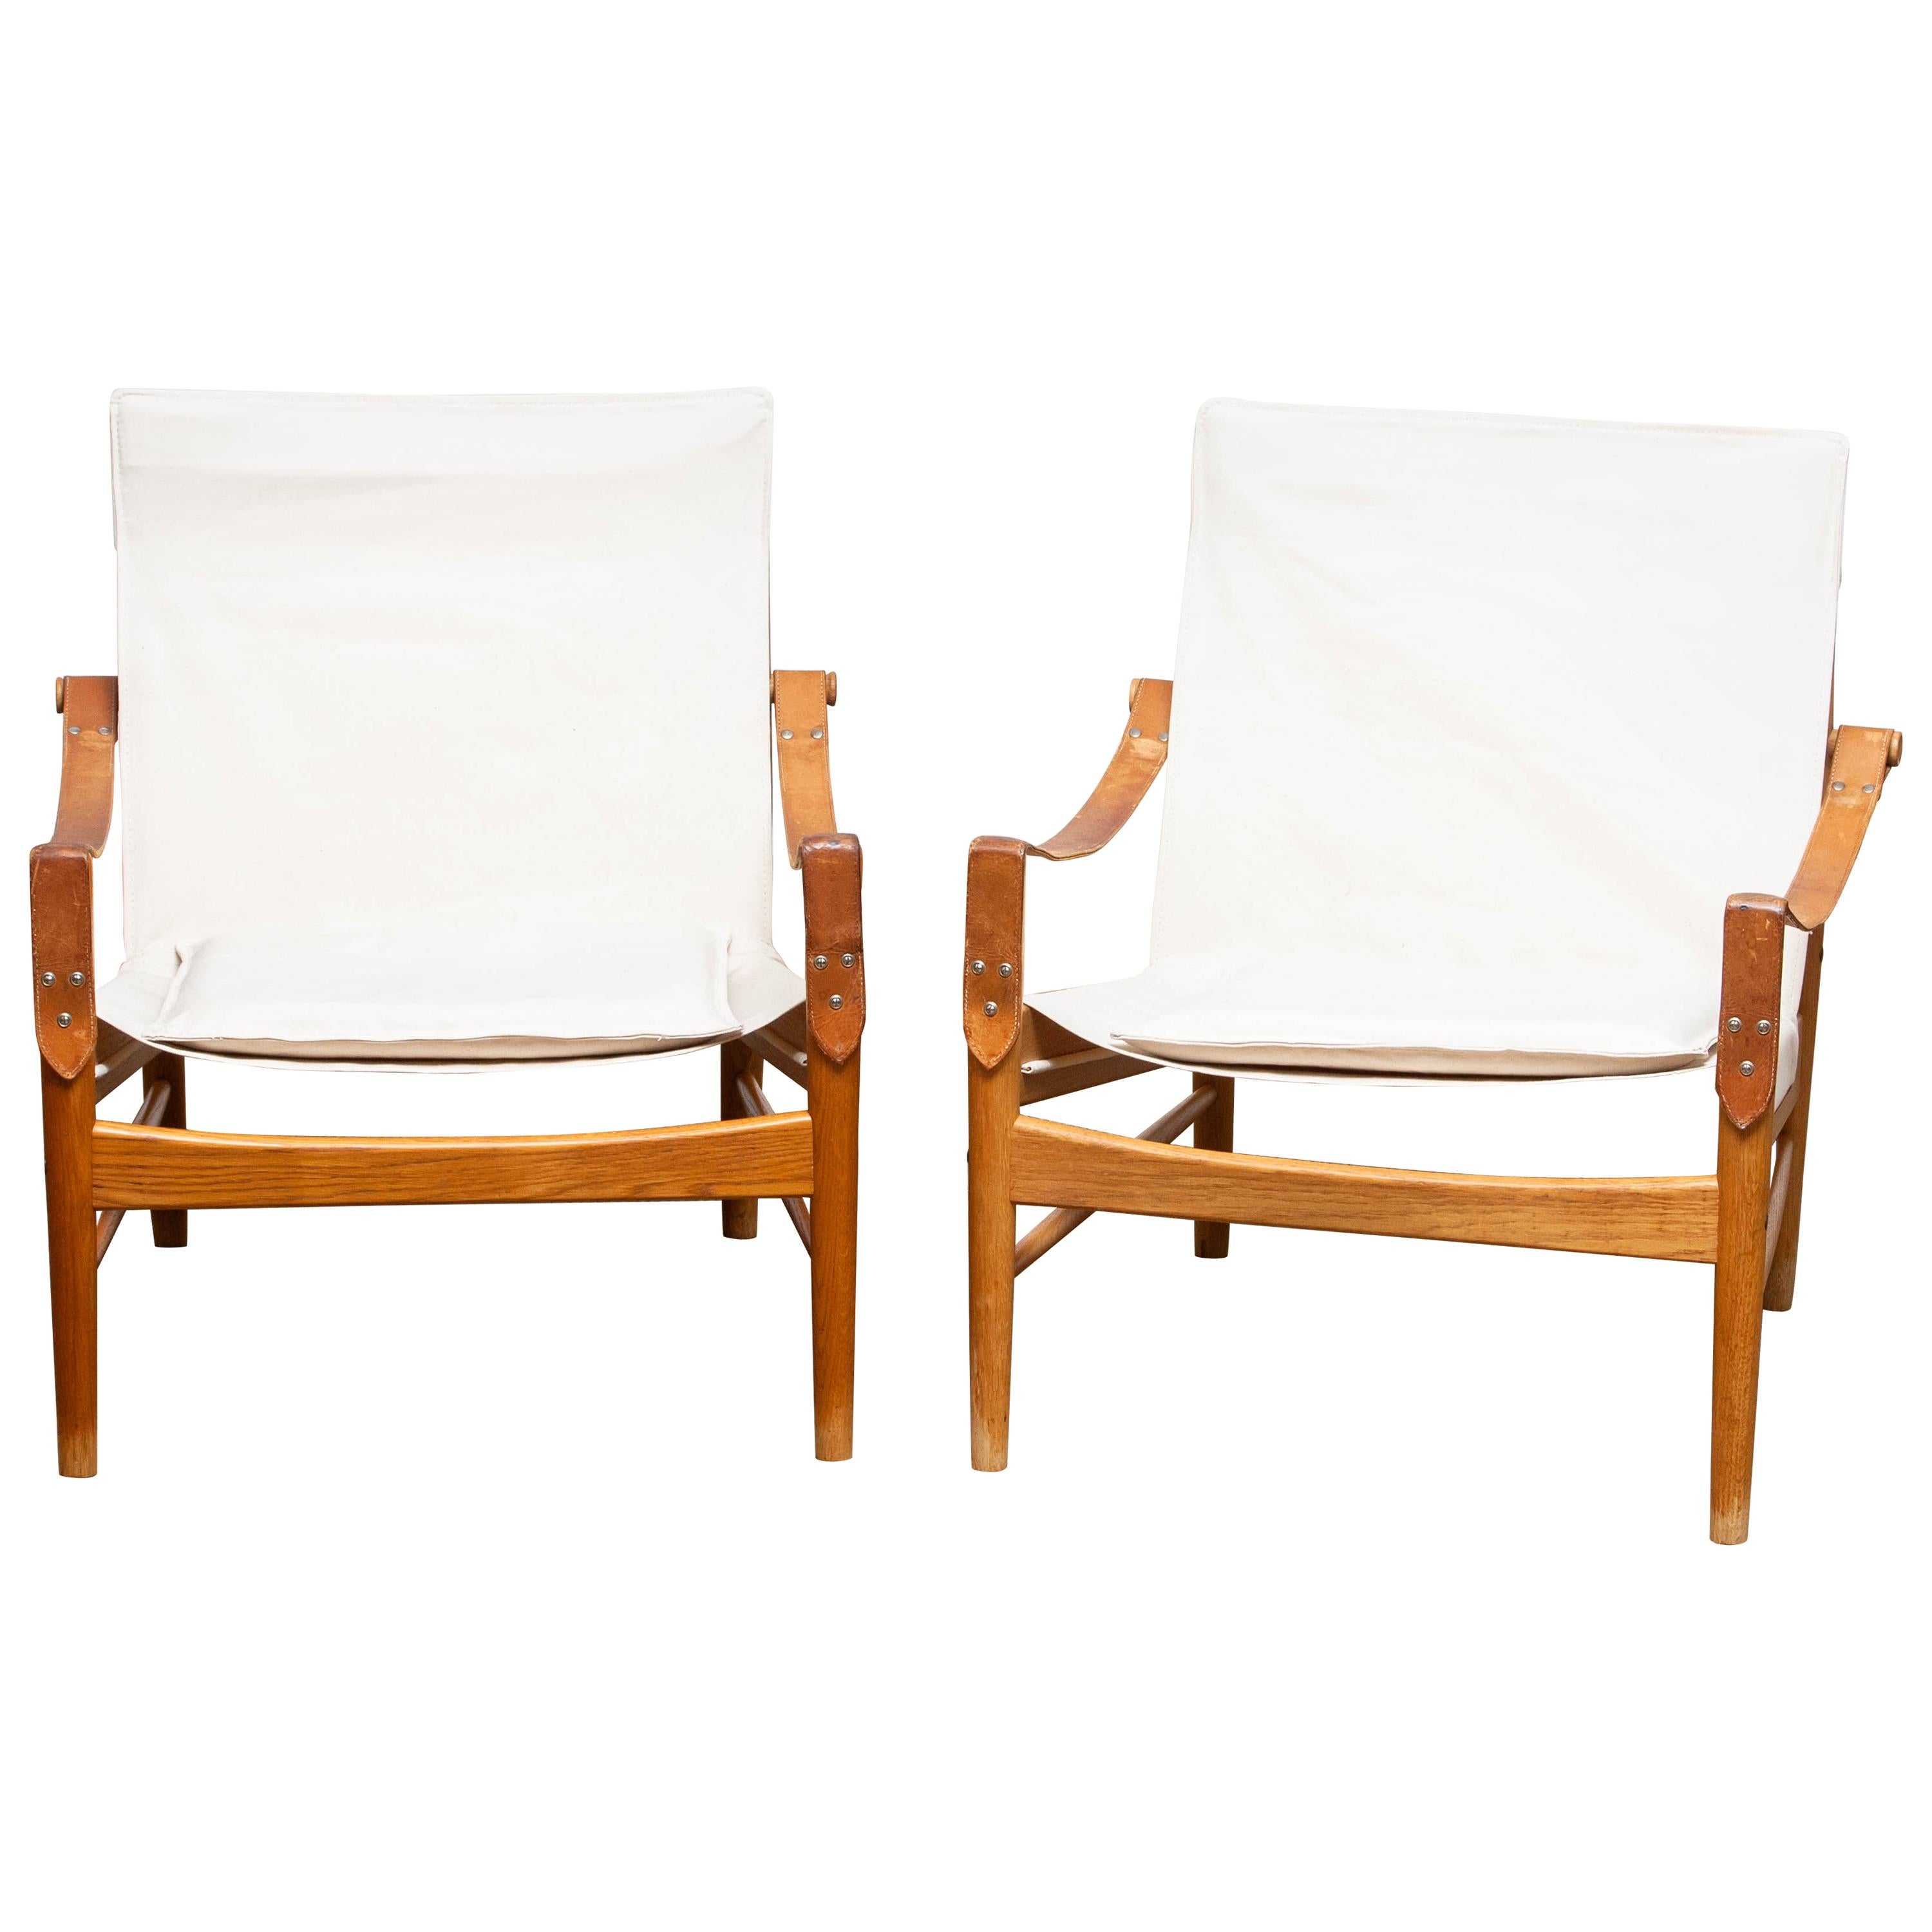 Beautiful pair of safari chairs designed by Hans Olsen for Viska Möbler in Kinna, Sweden.
These chairs are made of oak with a new canvas upholstery.
They are in a wonderful condition and marked.
Period: 1960s.
Dimensions: H 81 cm, W 73 cm, D 70